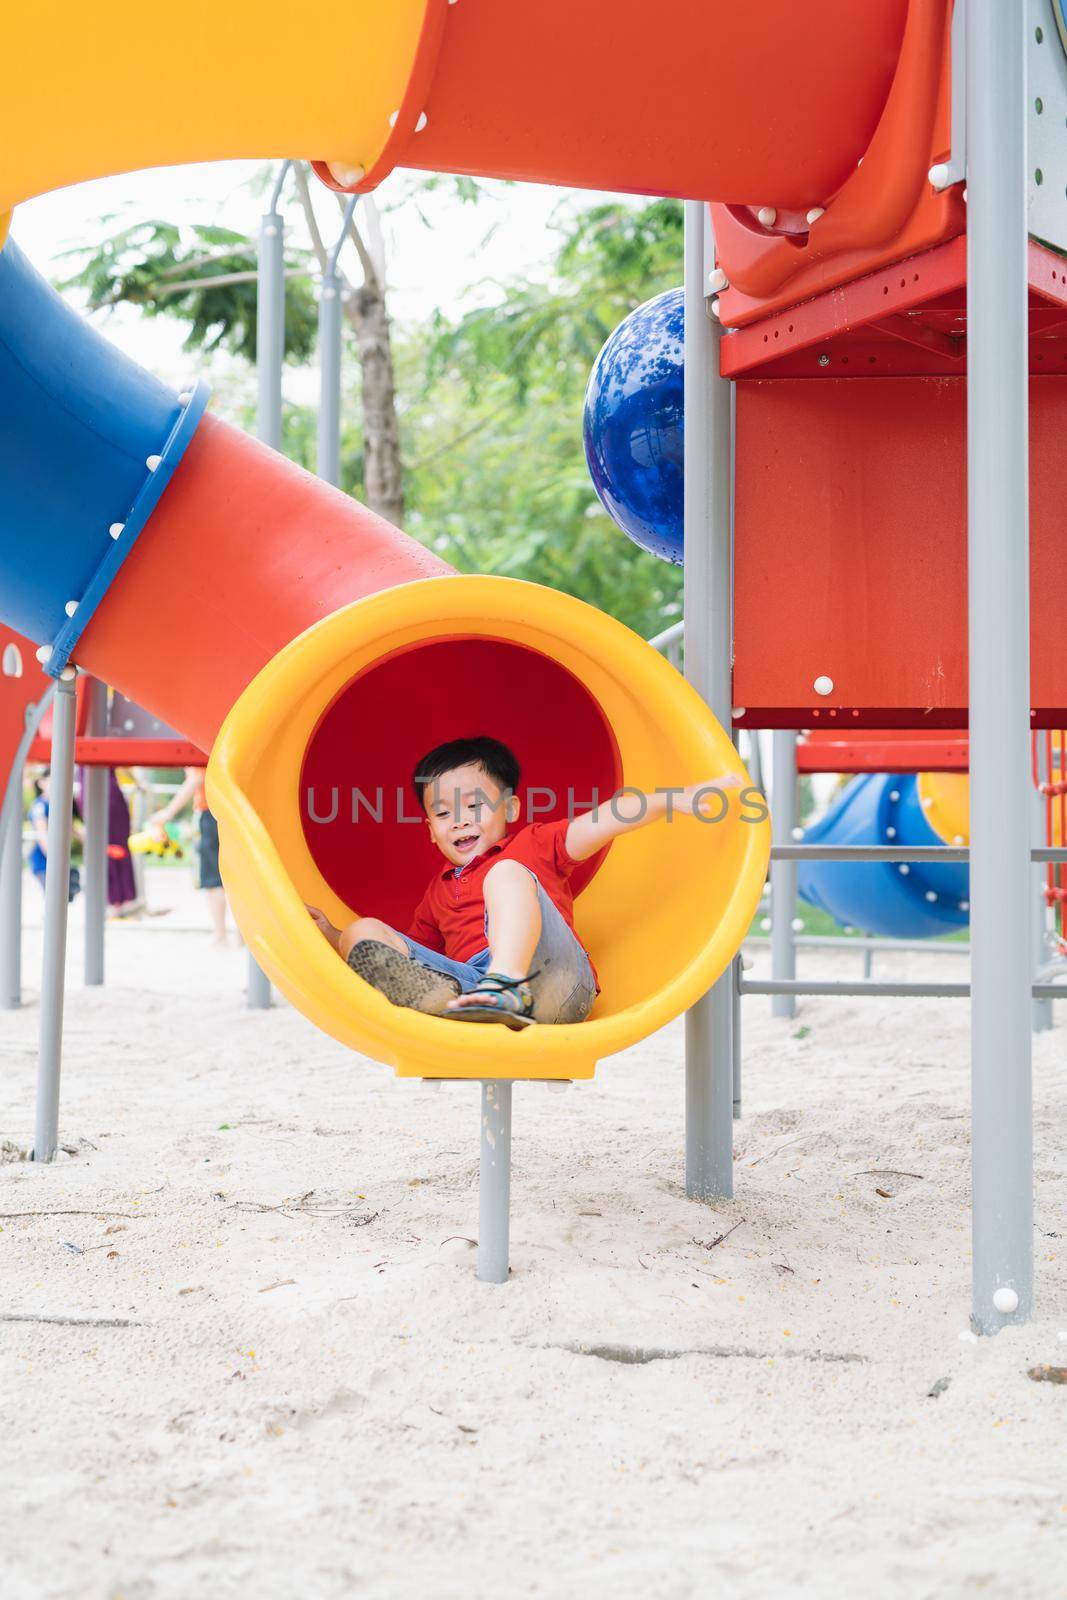 children playing on playground in summer outdoor park by makidotvn